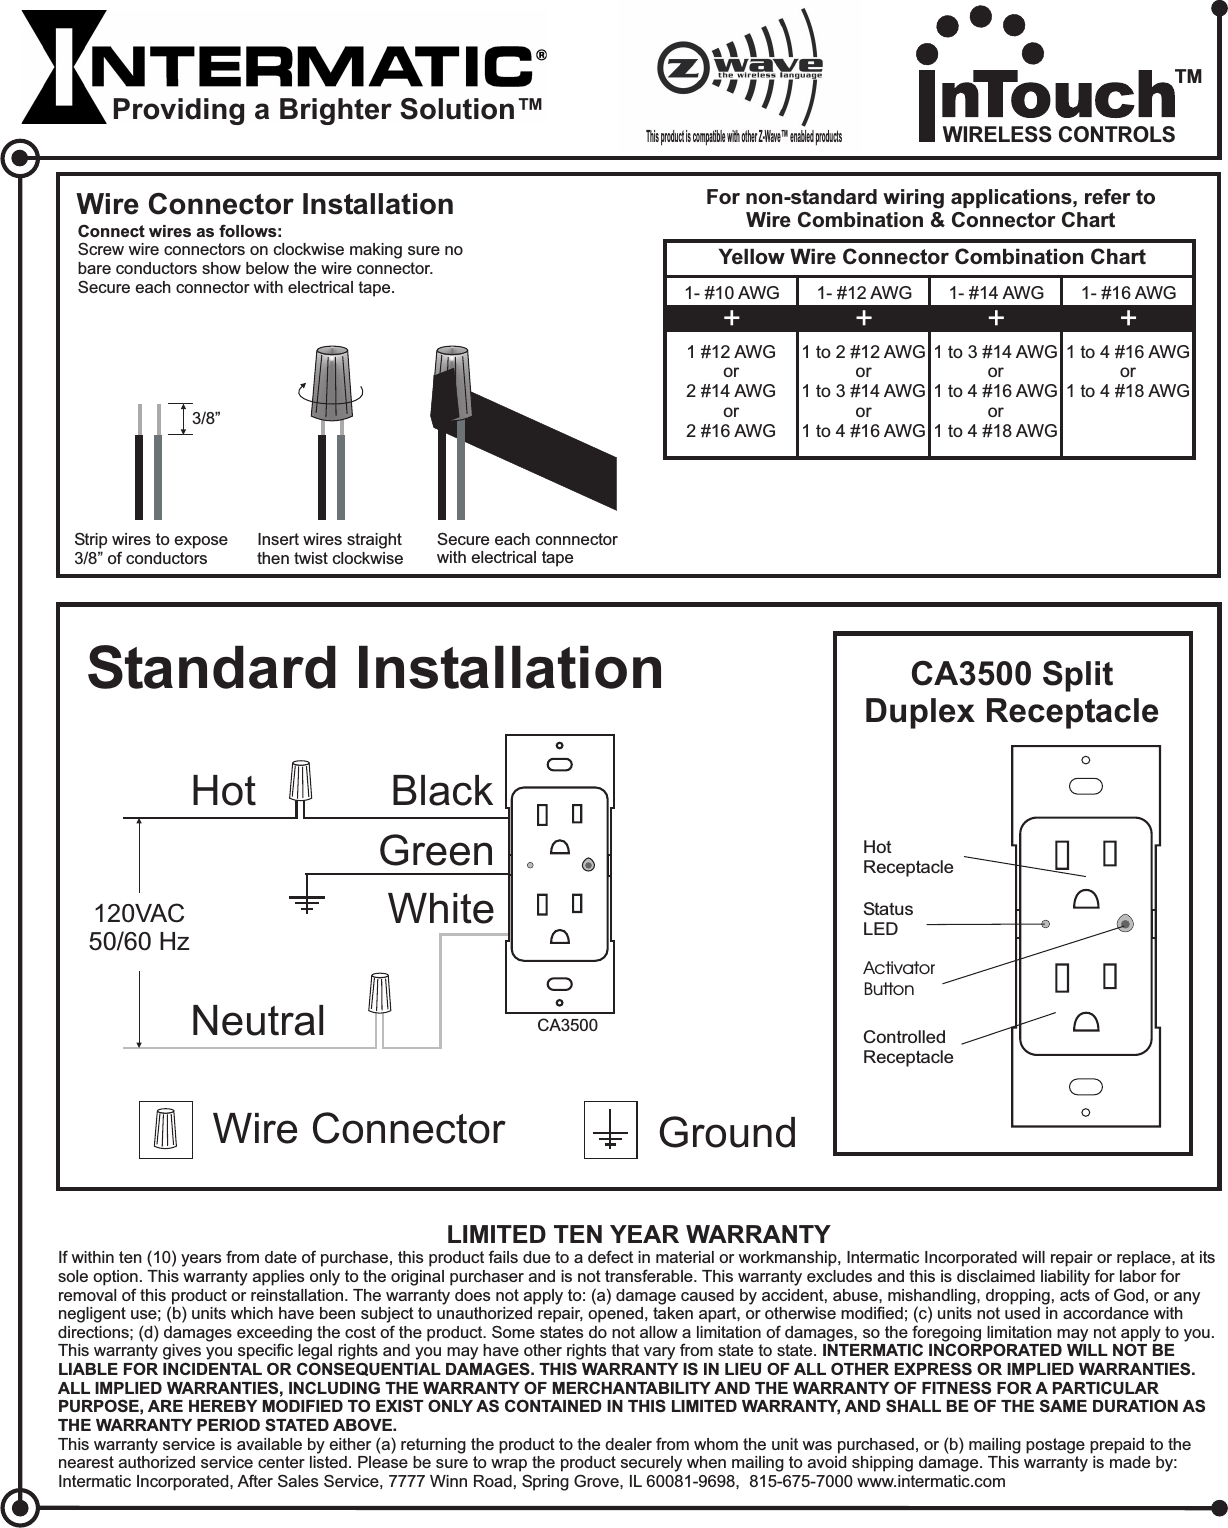 WhiteStandard InstallationHot BlackNeutralWire Connector GroundGreen120VAC50/60 HzCA3500ActivatorButtonHotReceptacleControlledReceptacleStatusLEDThis product is compatible with other Z-Wave enabled products™LIMITED TEN YEAR WARRANTYIf within ten (10) years from date of purchase, this product fails due to a defect in material or workmanship, Intermatic Incorporated will repair or replace, at itssole option. This warranty applies only to the original purchaser and is not transferable. This warranty excludes and this is disclaimed liability for labor forremoval of this product or reinstallation. The warranty does not apply to: (a) damage caused by accident, abuse, mishandling, dropping, acts of God, or anynegligent use; (b) units which have been subject to unauthorized repair, opened, taken apart, or otherwise modified; (c) units not used in accordance withdirections; (d) damages exceeding the cost of the product. Some states do not allow a limitation of damages, so the foregoing limitation may not apply to you.This warranty gives you specific legal rights and you may have other rights that vary from state to state.This warranty service is available by either (a) returning the product to the dealer from whom the unit was purchased, or (b) mailing postage prepaid to thenearest authorized service center listed. Please be sure to wrap the product securely when mailing to avoid shipping damage. This warranty is made by:Intermatic Incorporated, After Sales Service, 7777 Winn Road, Spring Grove, IL 60081-9698, 815-675-7000 www.intermatic.comINTERMATIC INCORPORATED WILL NOT BELIABLE FOR INCIDENTAL OR CONSEQUENTIAL DAMAGES. THIS WARRANTY IS IN LIEU OF ALL OTHER EXPRESS OR IMPLIED WARRANTIES.ALL IMPLIED WARRANTIES, INCLUDING THE WARRANTY OF MERCHANTABILITY AND THE WARRANTY OF FITNESS FOR A PARTICULARPURPOSE, ARE HEREBY MODIFIED TO EXIST ONLY AS CONTAINED IN THIS LIMITED WARRANTY, AND SHALL BE OF THE SAME DURATION ASTHE WARRANTY PERIOD STATED ABOVE.Wire Connector InstallationConnect wires as follows:Screw wire connectors on clockwise making sure nobare conductors show below the wire connector.Secure each connector with electrical tape.Insert wires straightthen twist clockwiseSecure each connnectorwith electrical tapeStrip wires to expose3/8” of conductors3/8”For non-standard wiring applications, refer toWire Combination &amp; Connector ChartYellow Wire Connector Combination Chart1- #10 AWG1 #12 AWGor2 #14 AWGor2 #16 AWG+1- #12 AWG1to2#12AWGor1to3#14AWGor1to4#16AWG+1- #14 AWG1to3#14AWGor1to4#16AWGor1to4#18AWG+1- #16 AWG1to4#16AWGor1to4#18AWG+CA3500 SplitDuplex ReceptacleProviding a Brighter Solution™WIRELESS CONTROLSTM